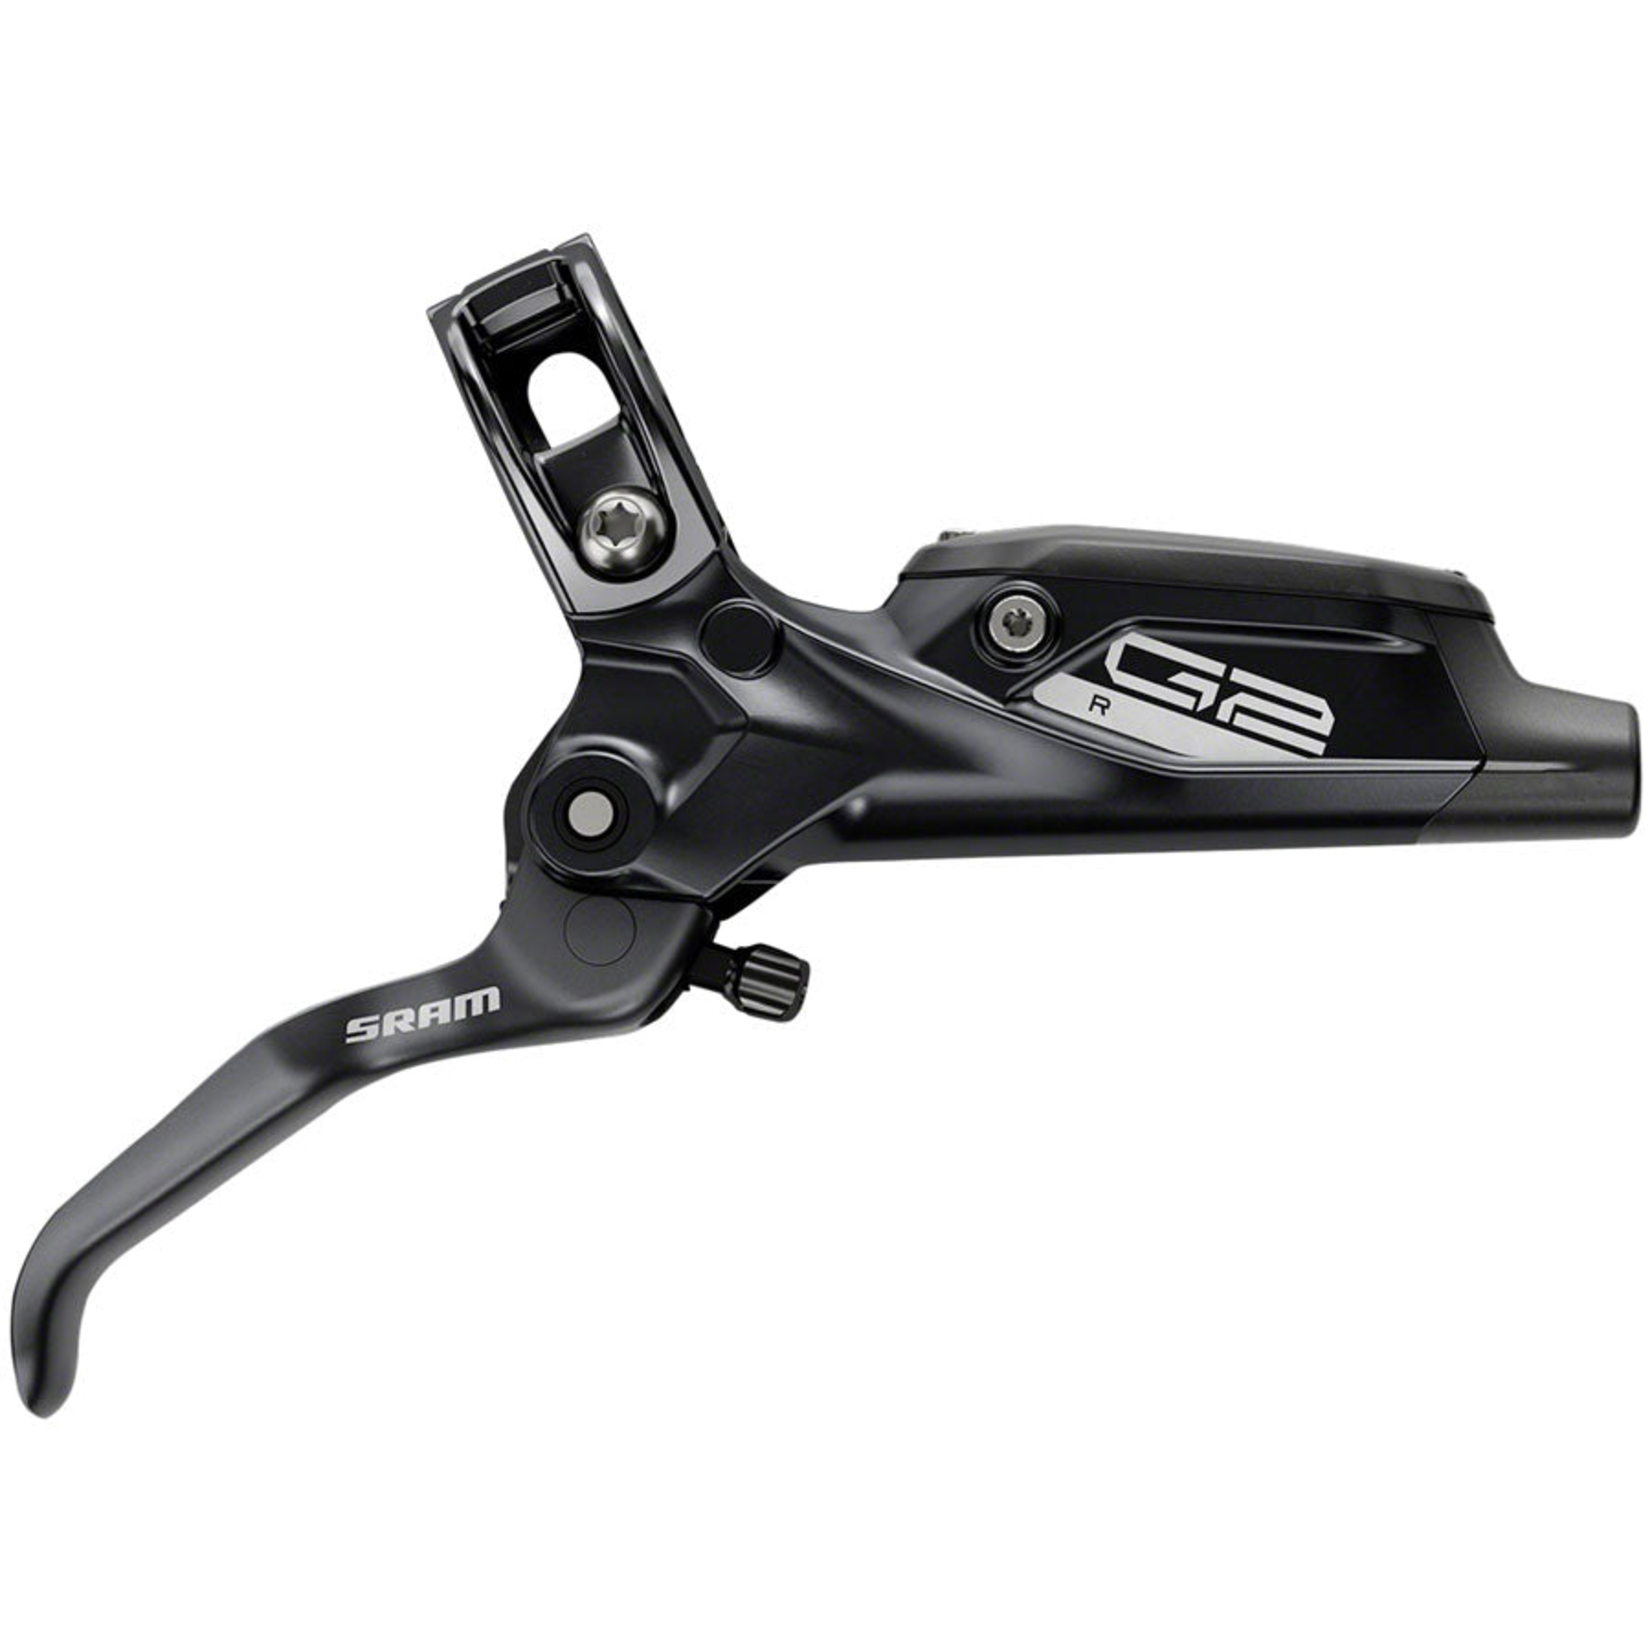 SRAM G2 R Disc Brake and Lever - Front, Hydraulic, Post Mount, Diffusion Black Anodized, A2